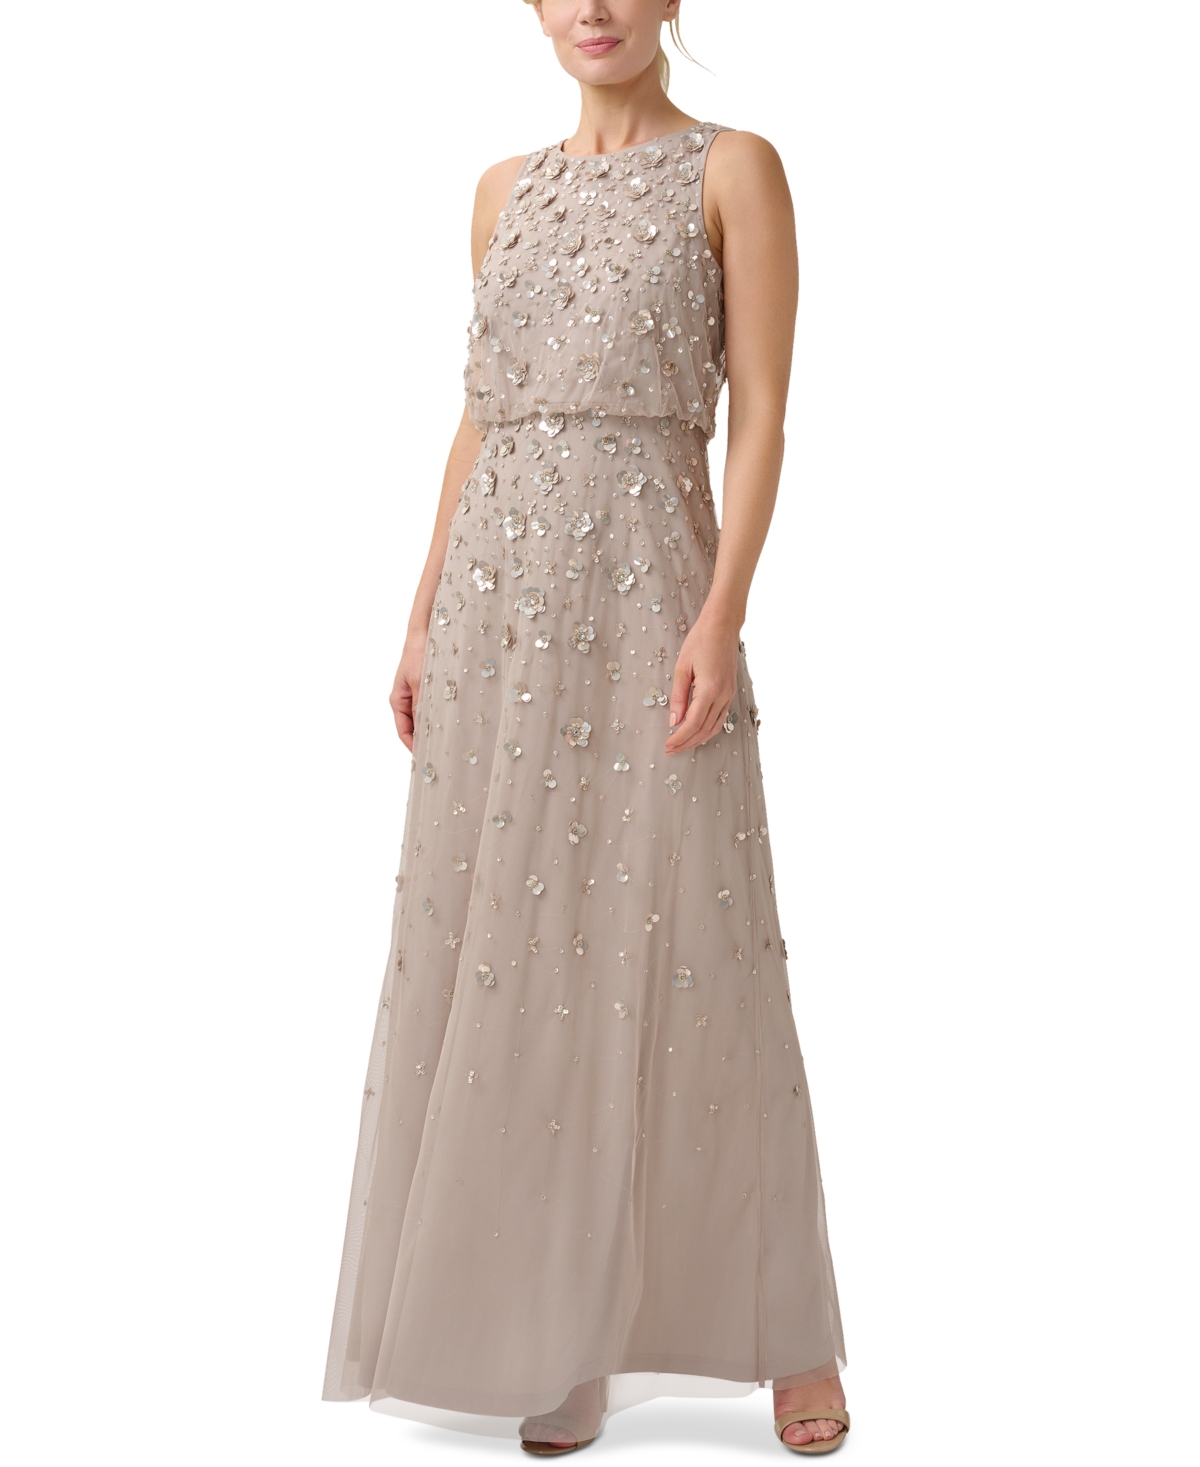 Adrianna Papell Beaded Sequined Gown